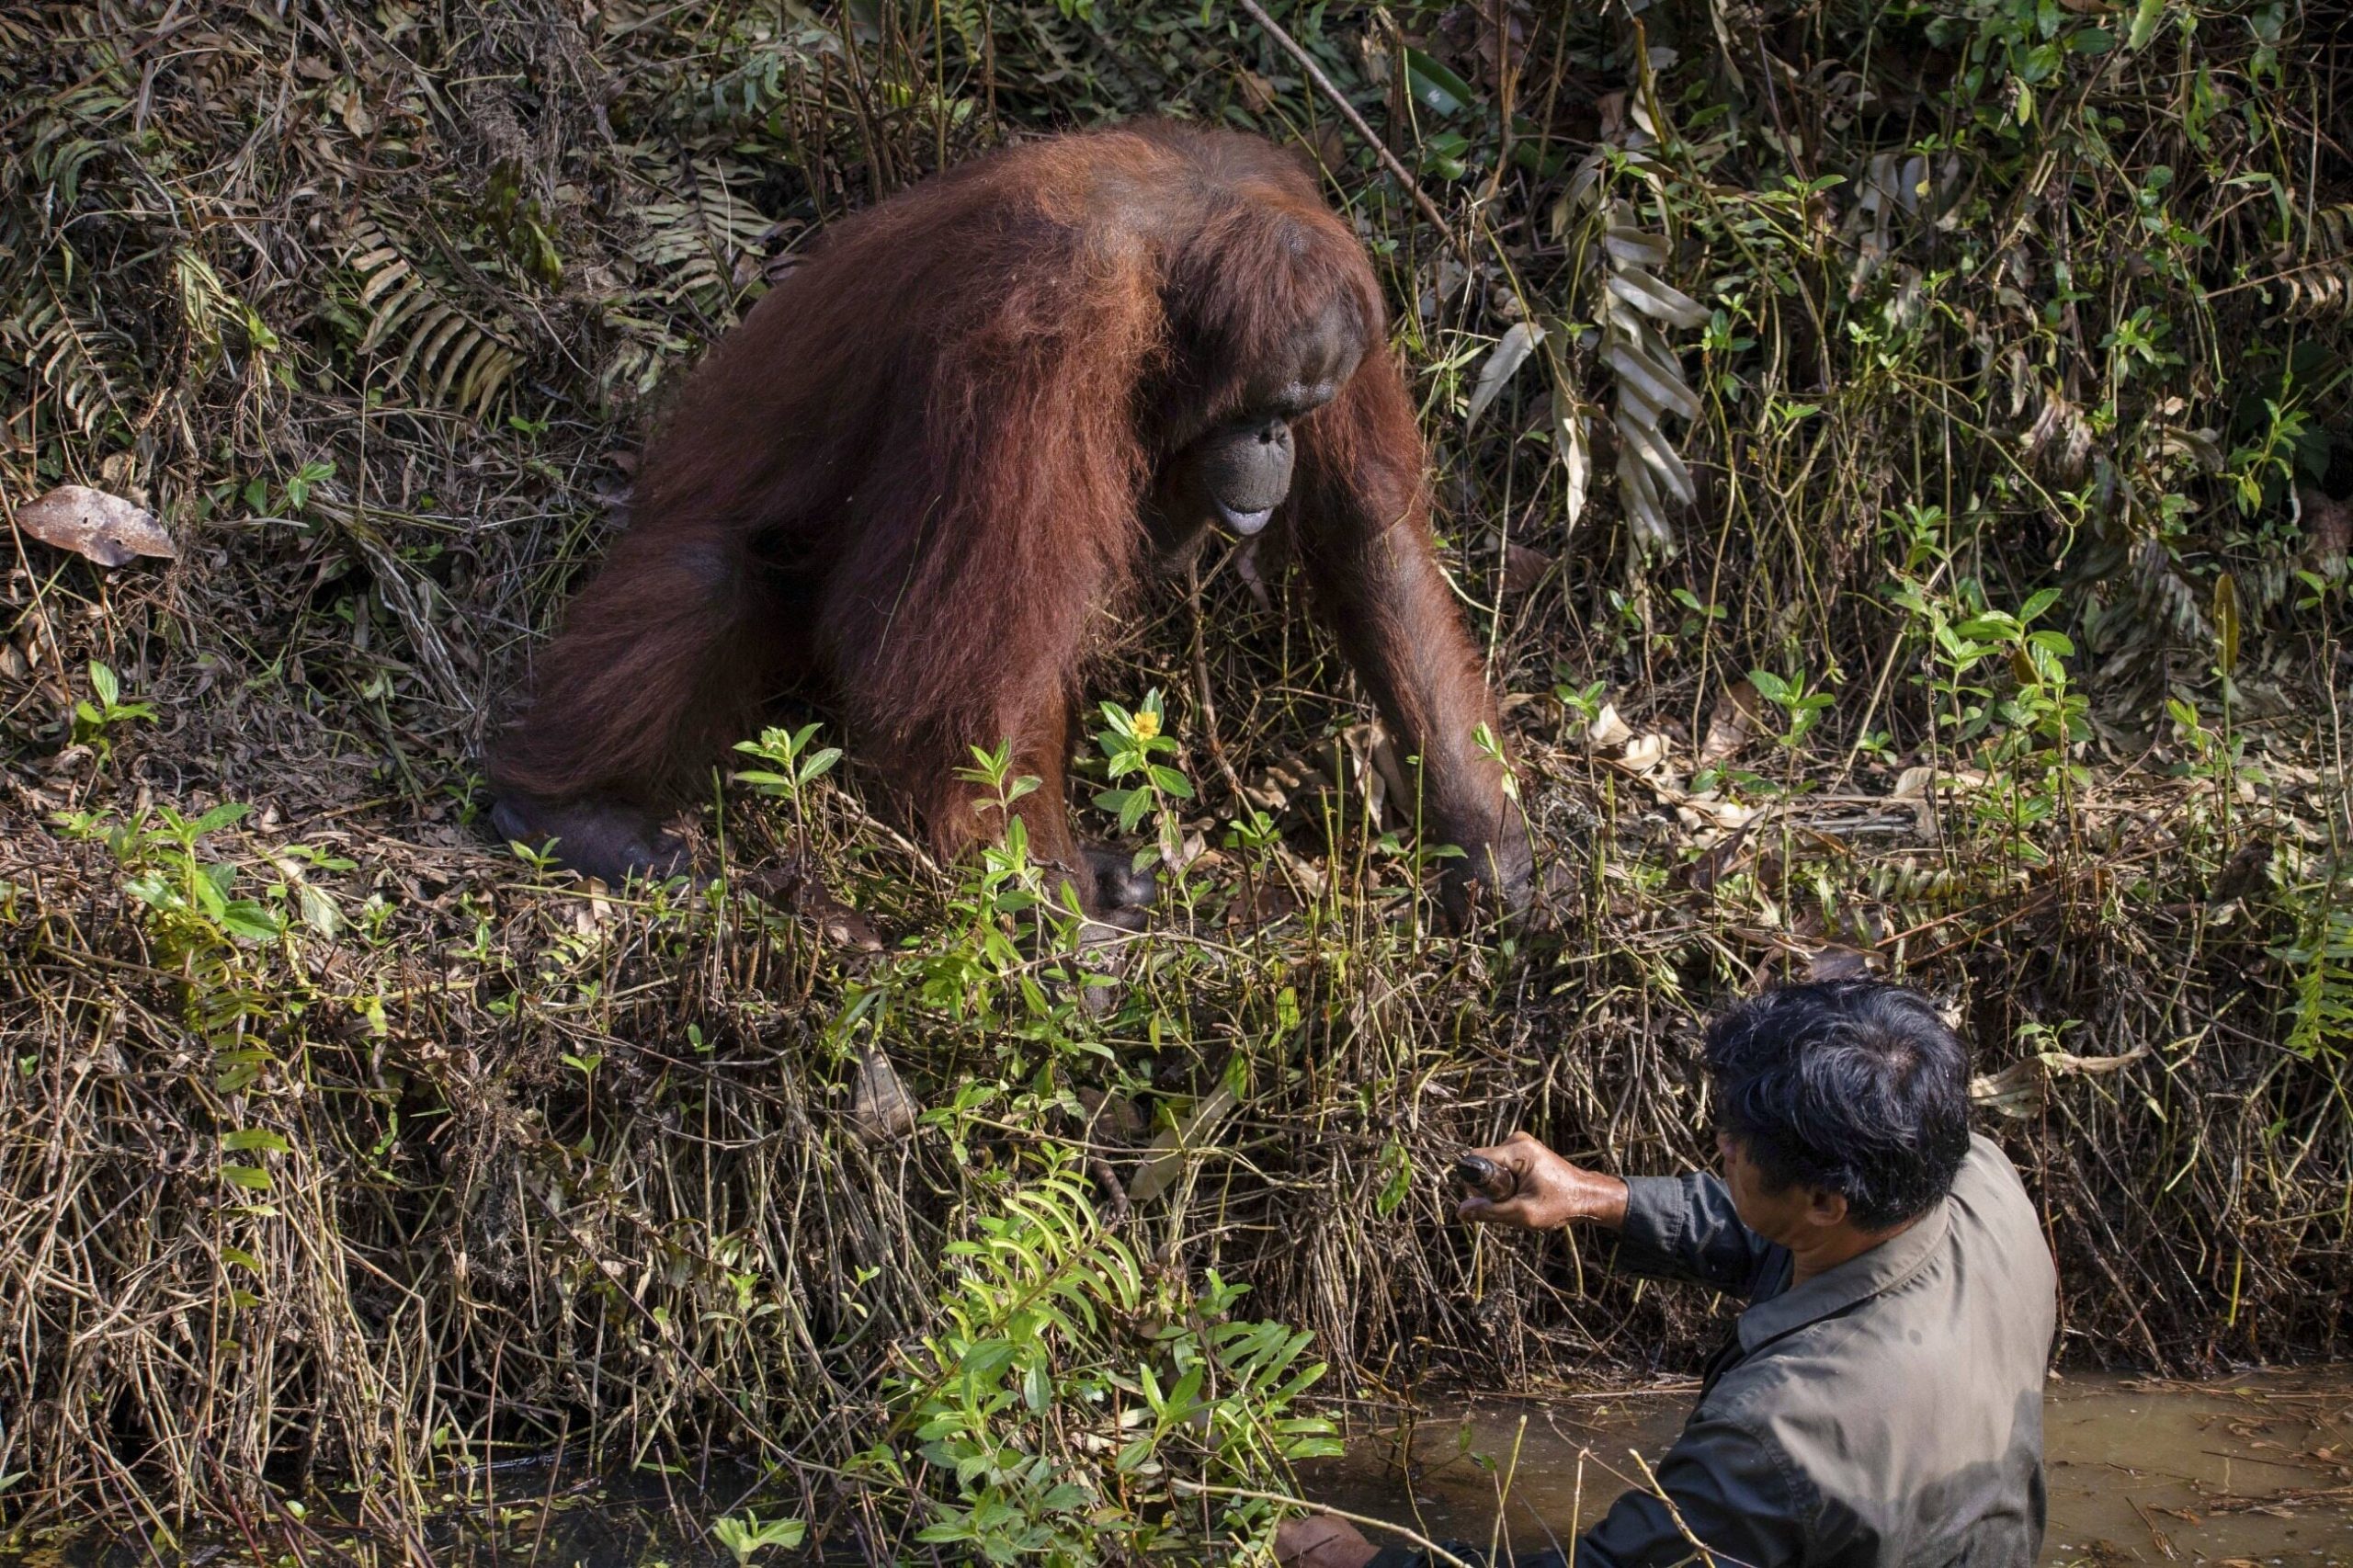 An orangutan extends a helping hand to a human.  A beautiful scene immortalized in the photo